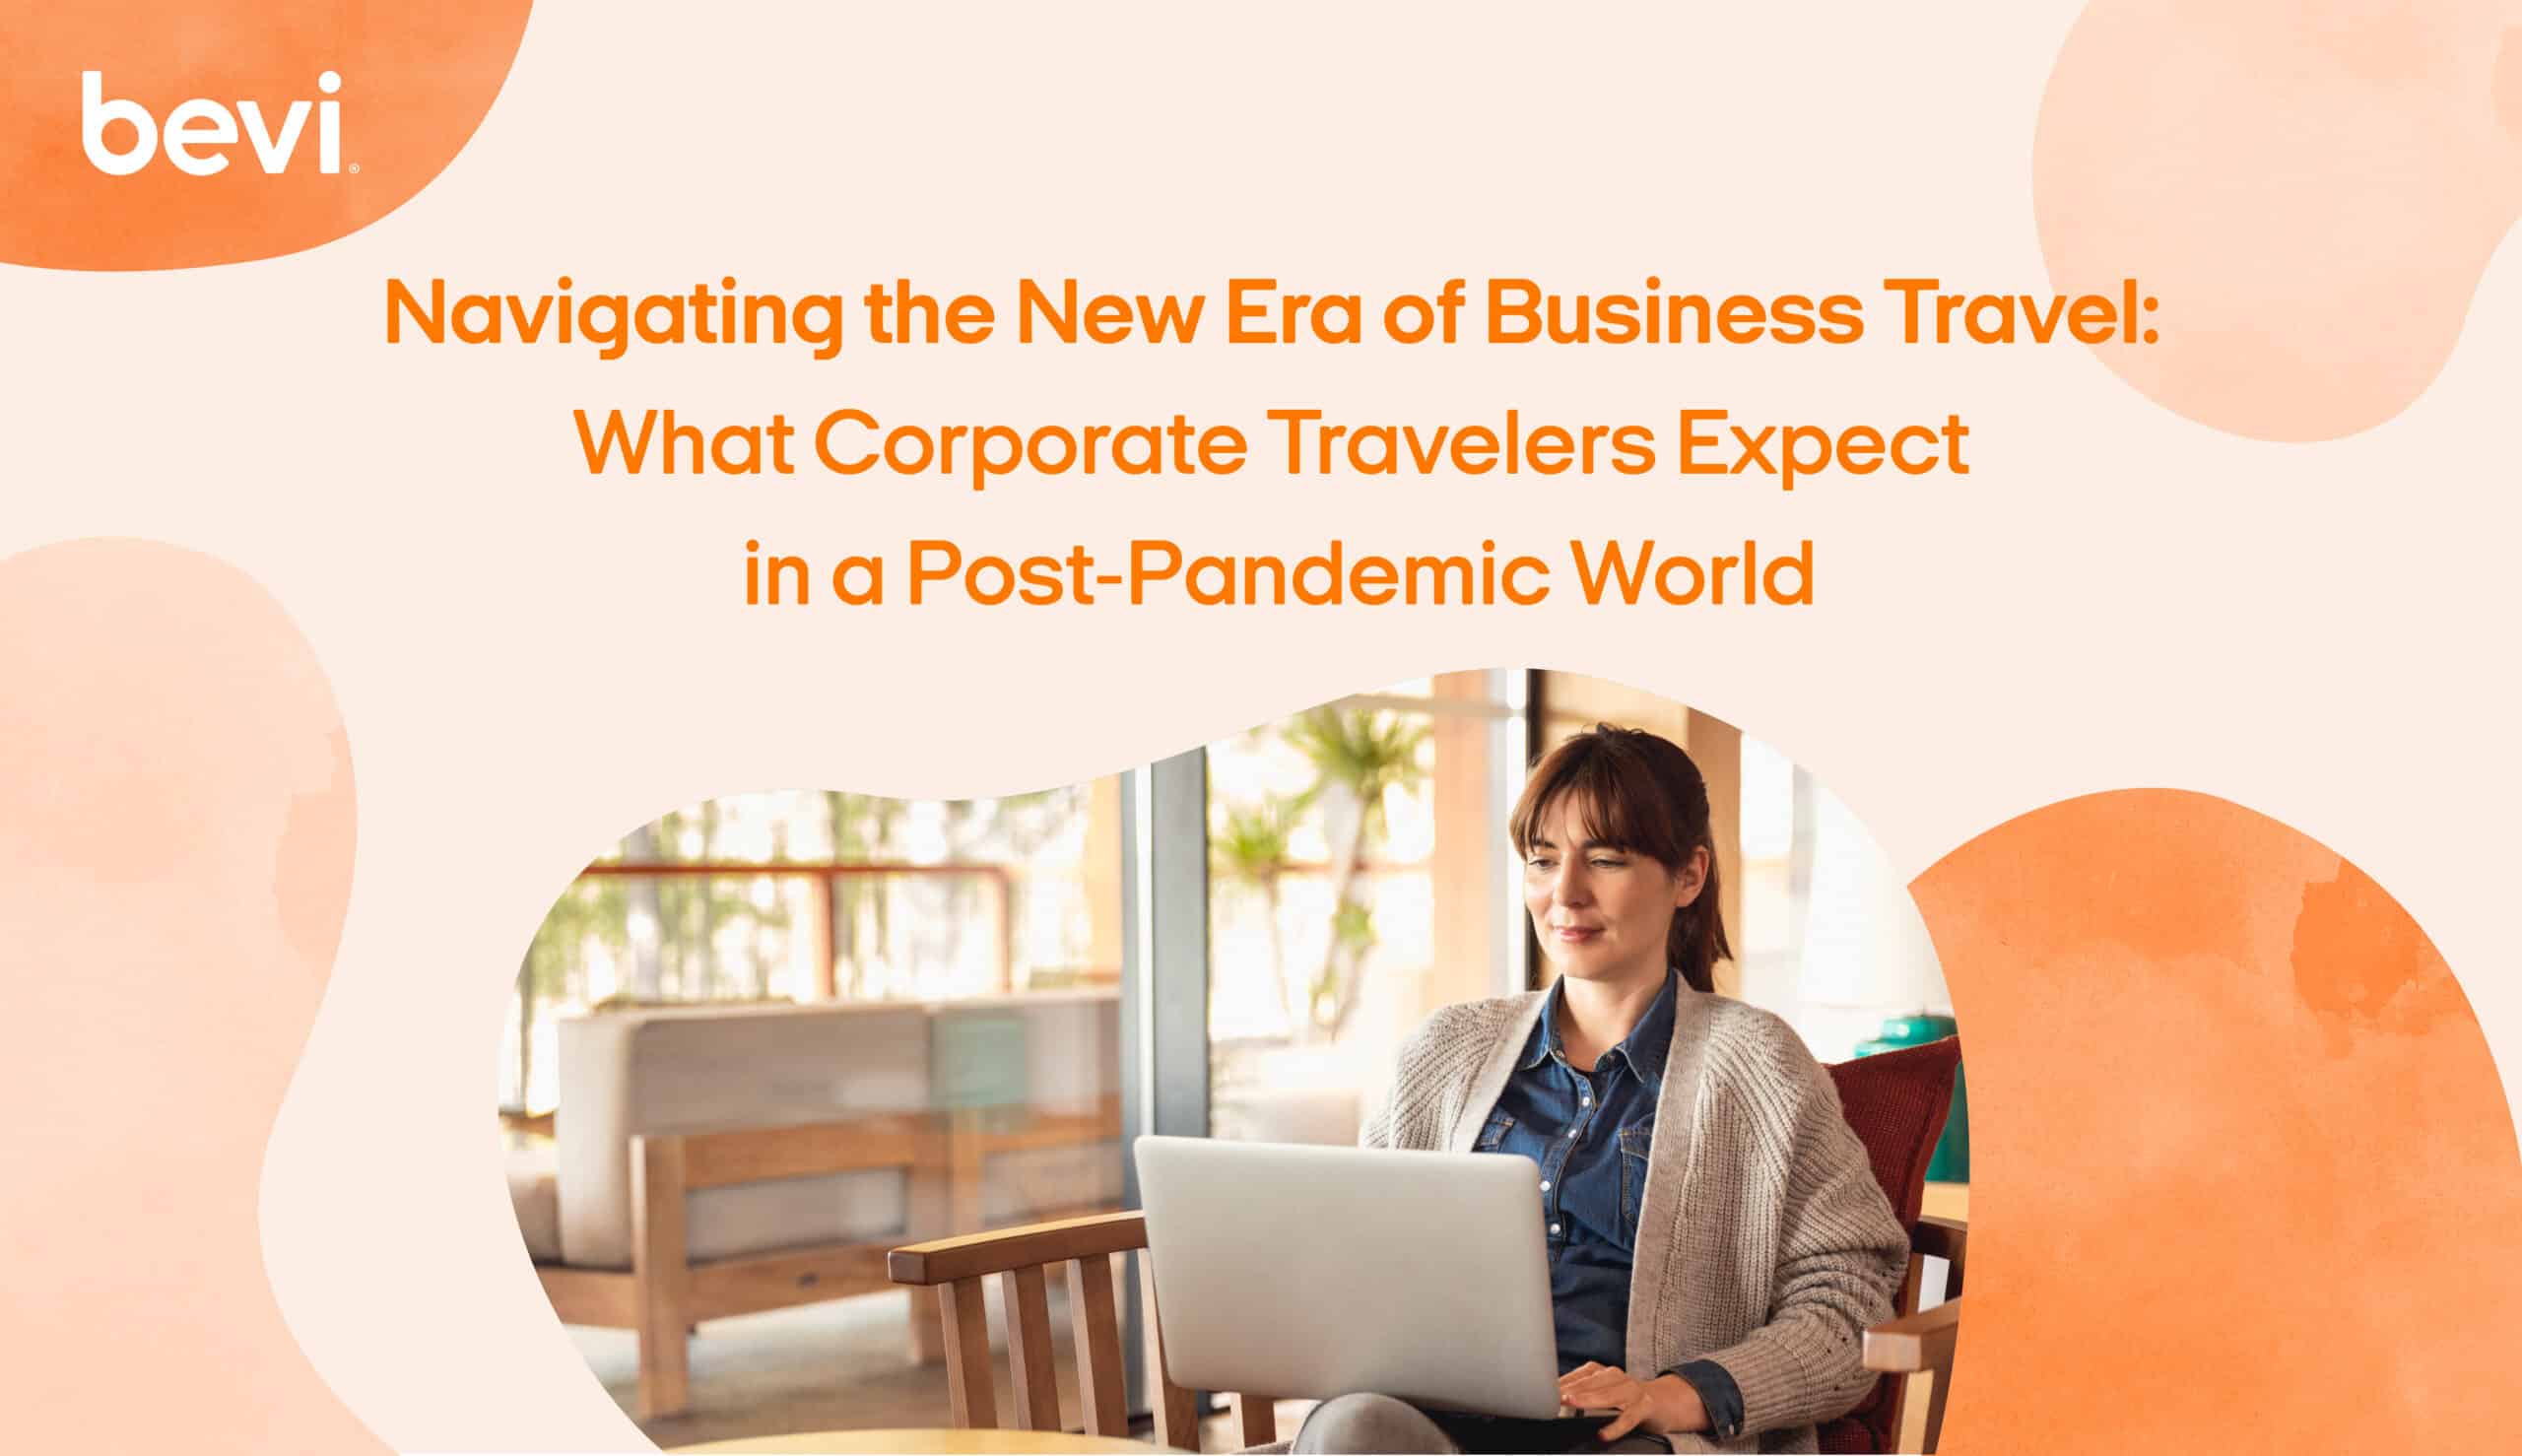 Navigating the New Era of Business Travel: What Corporate Travelers Expect in a Post-Pandemic World